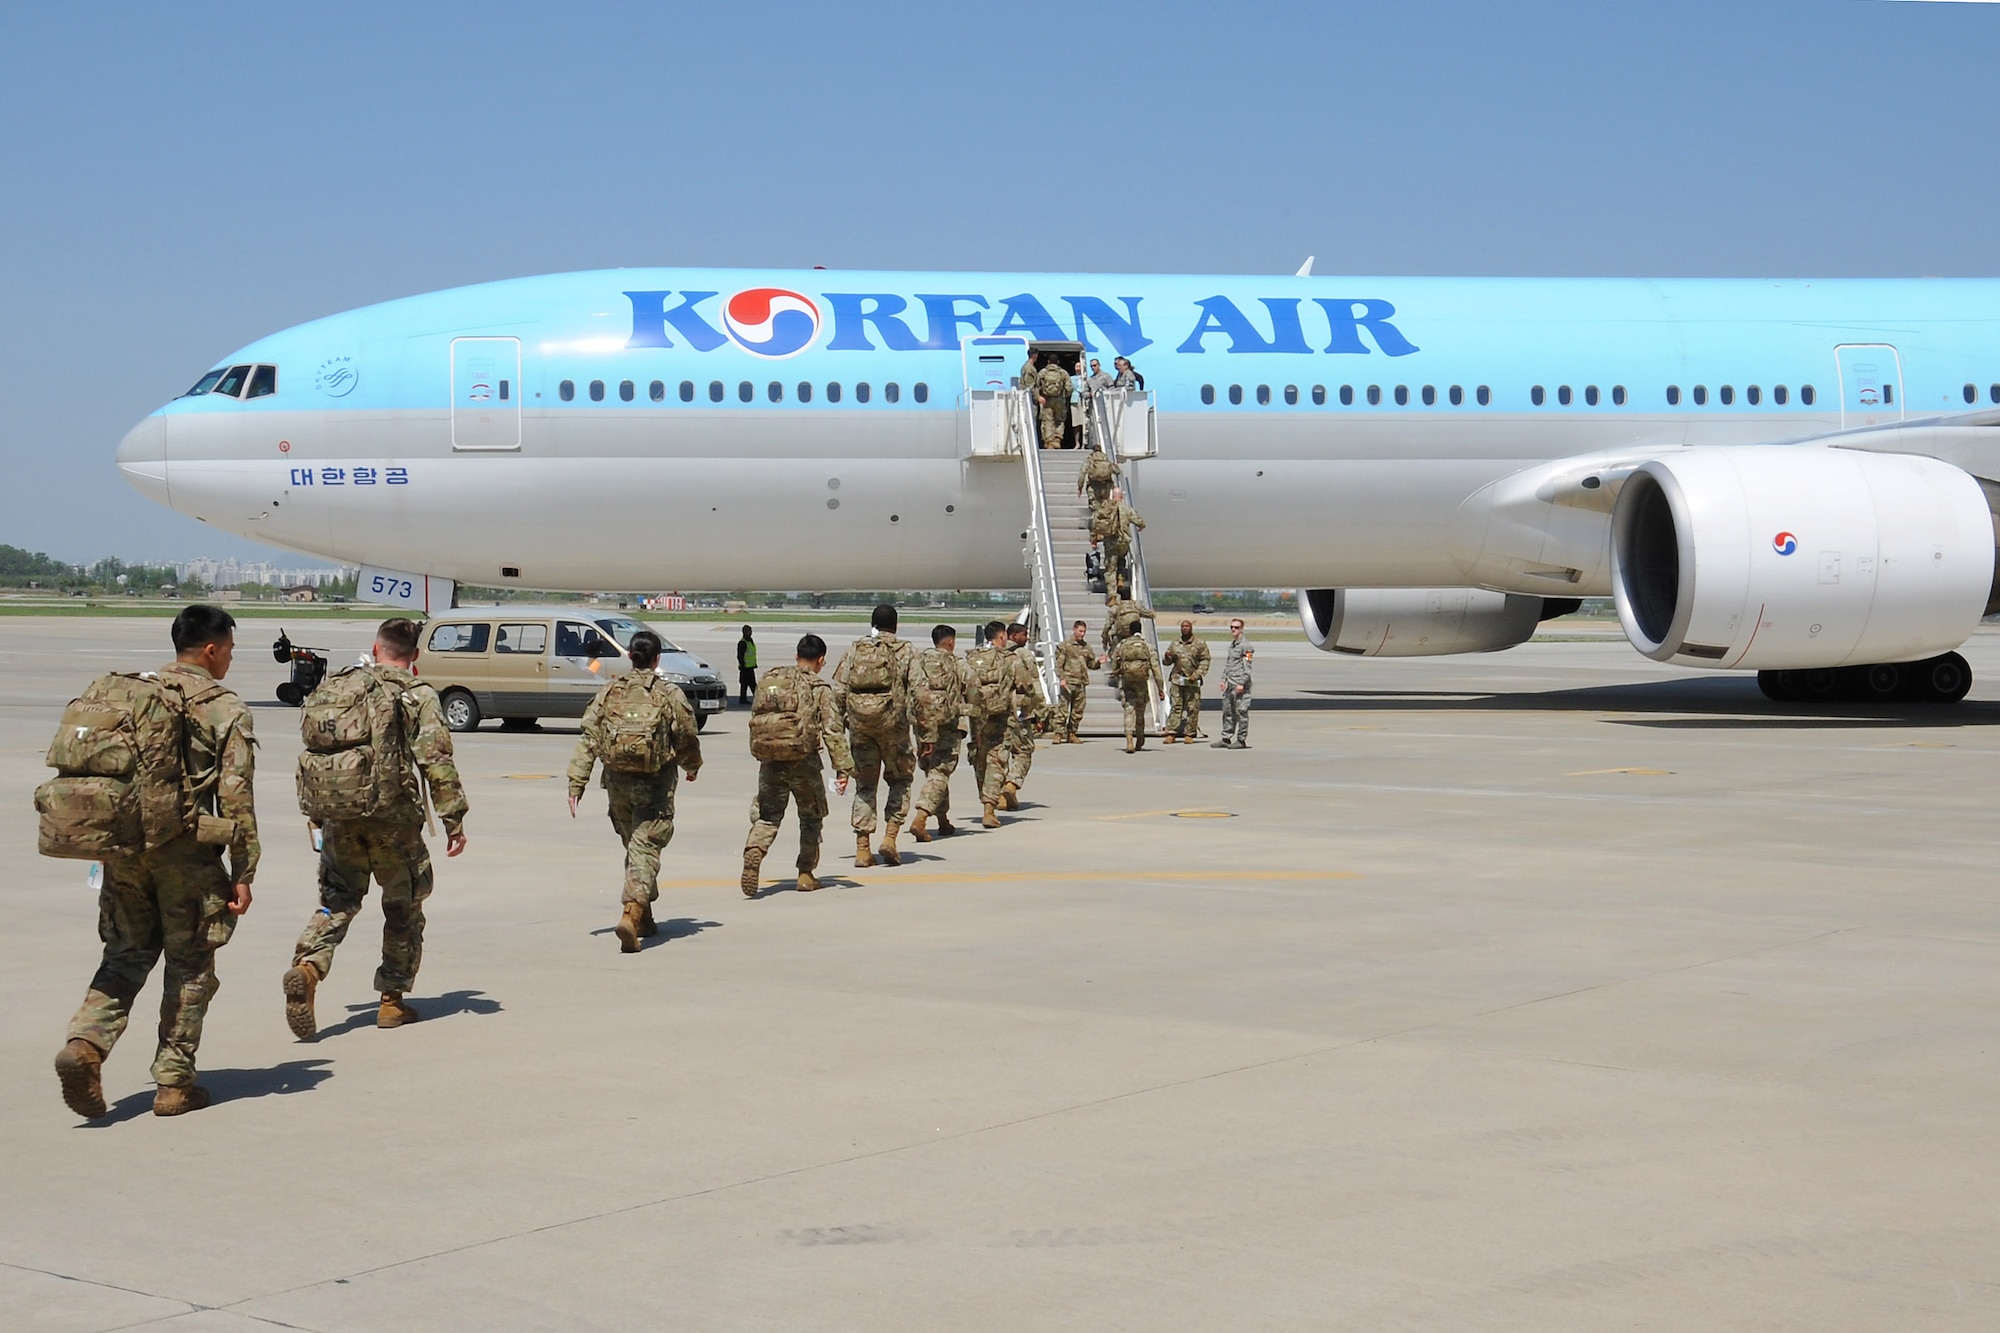 U.S. Army Soldiers board a Korean Air Boeing 777 aircraft during the Mutual Airlift Support Agreement (MASA) exercise at Osan Air Base, Republic of Korea May 4, 2018. More than 500 Soldiers boarded the plane as part of the MASA to test interoperability and procedures between the United States military, ROK Air Force and Korean Air Lines. (U.S. Air Force photo by Tech. Sgt. Ashley Tyler)